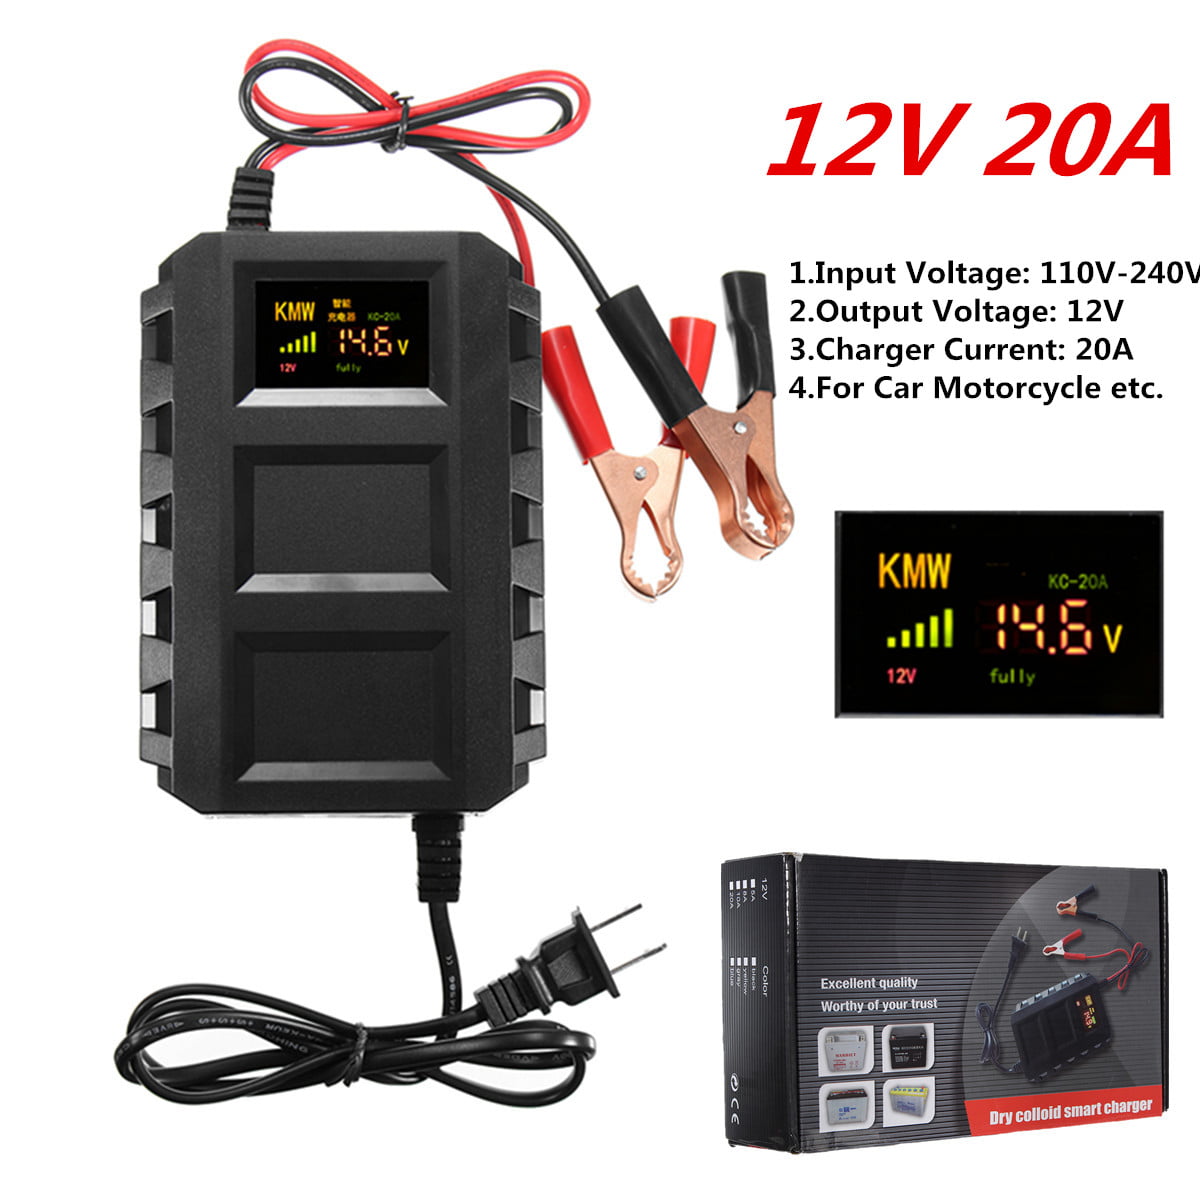 Car Battery Charger 6//12V 6A Vehicle Van Lead Boost Circuit Jump Starter Garage